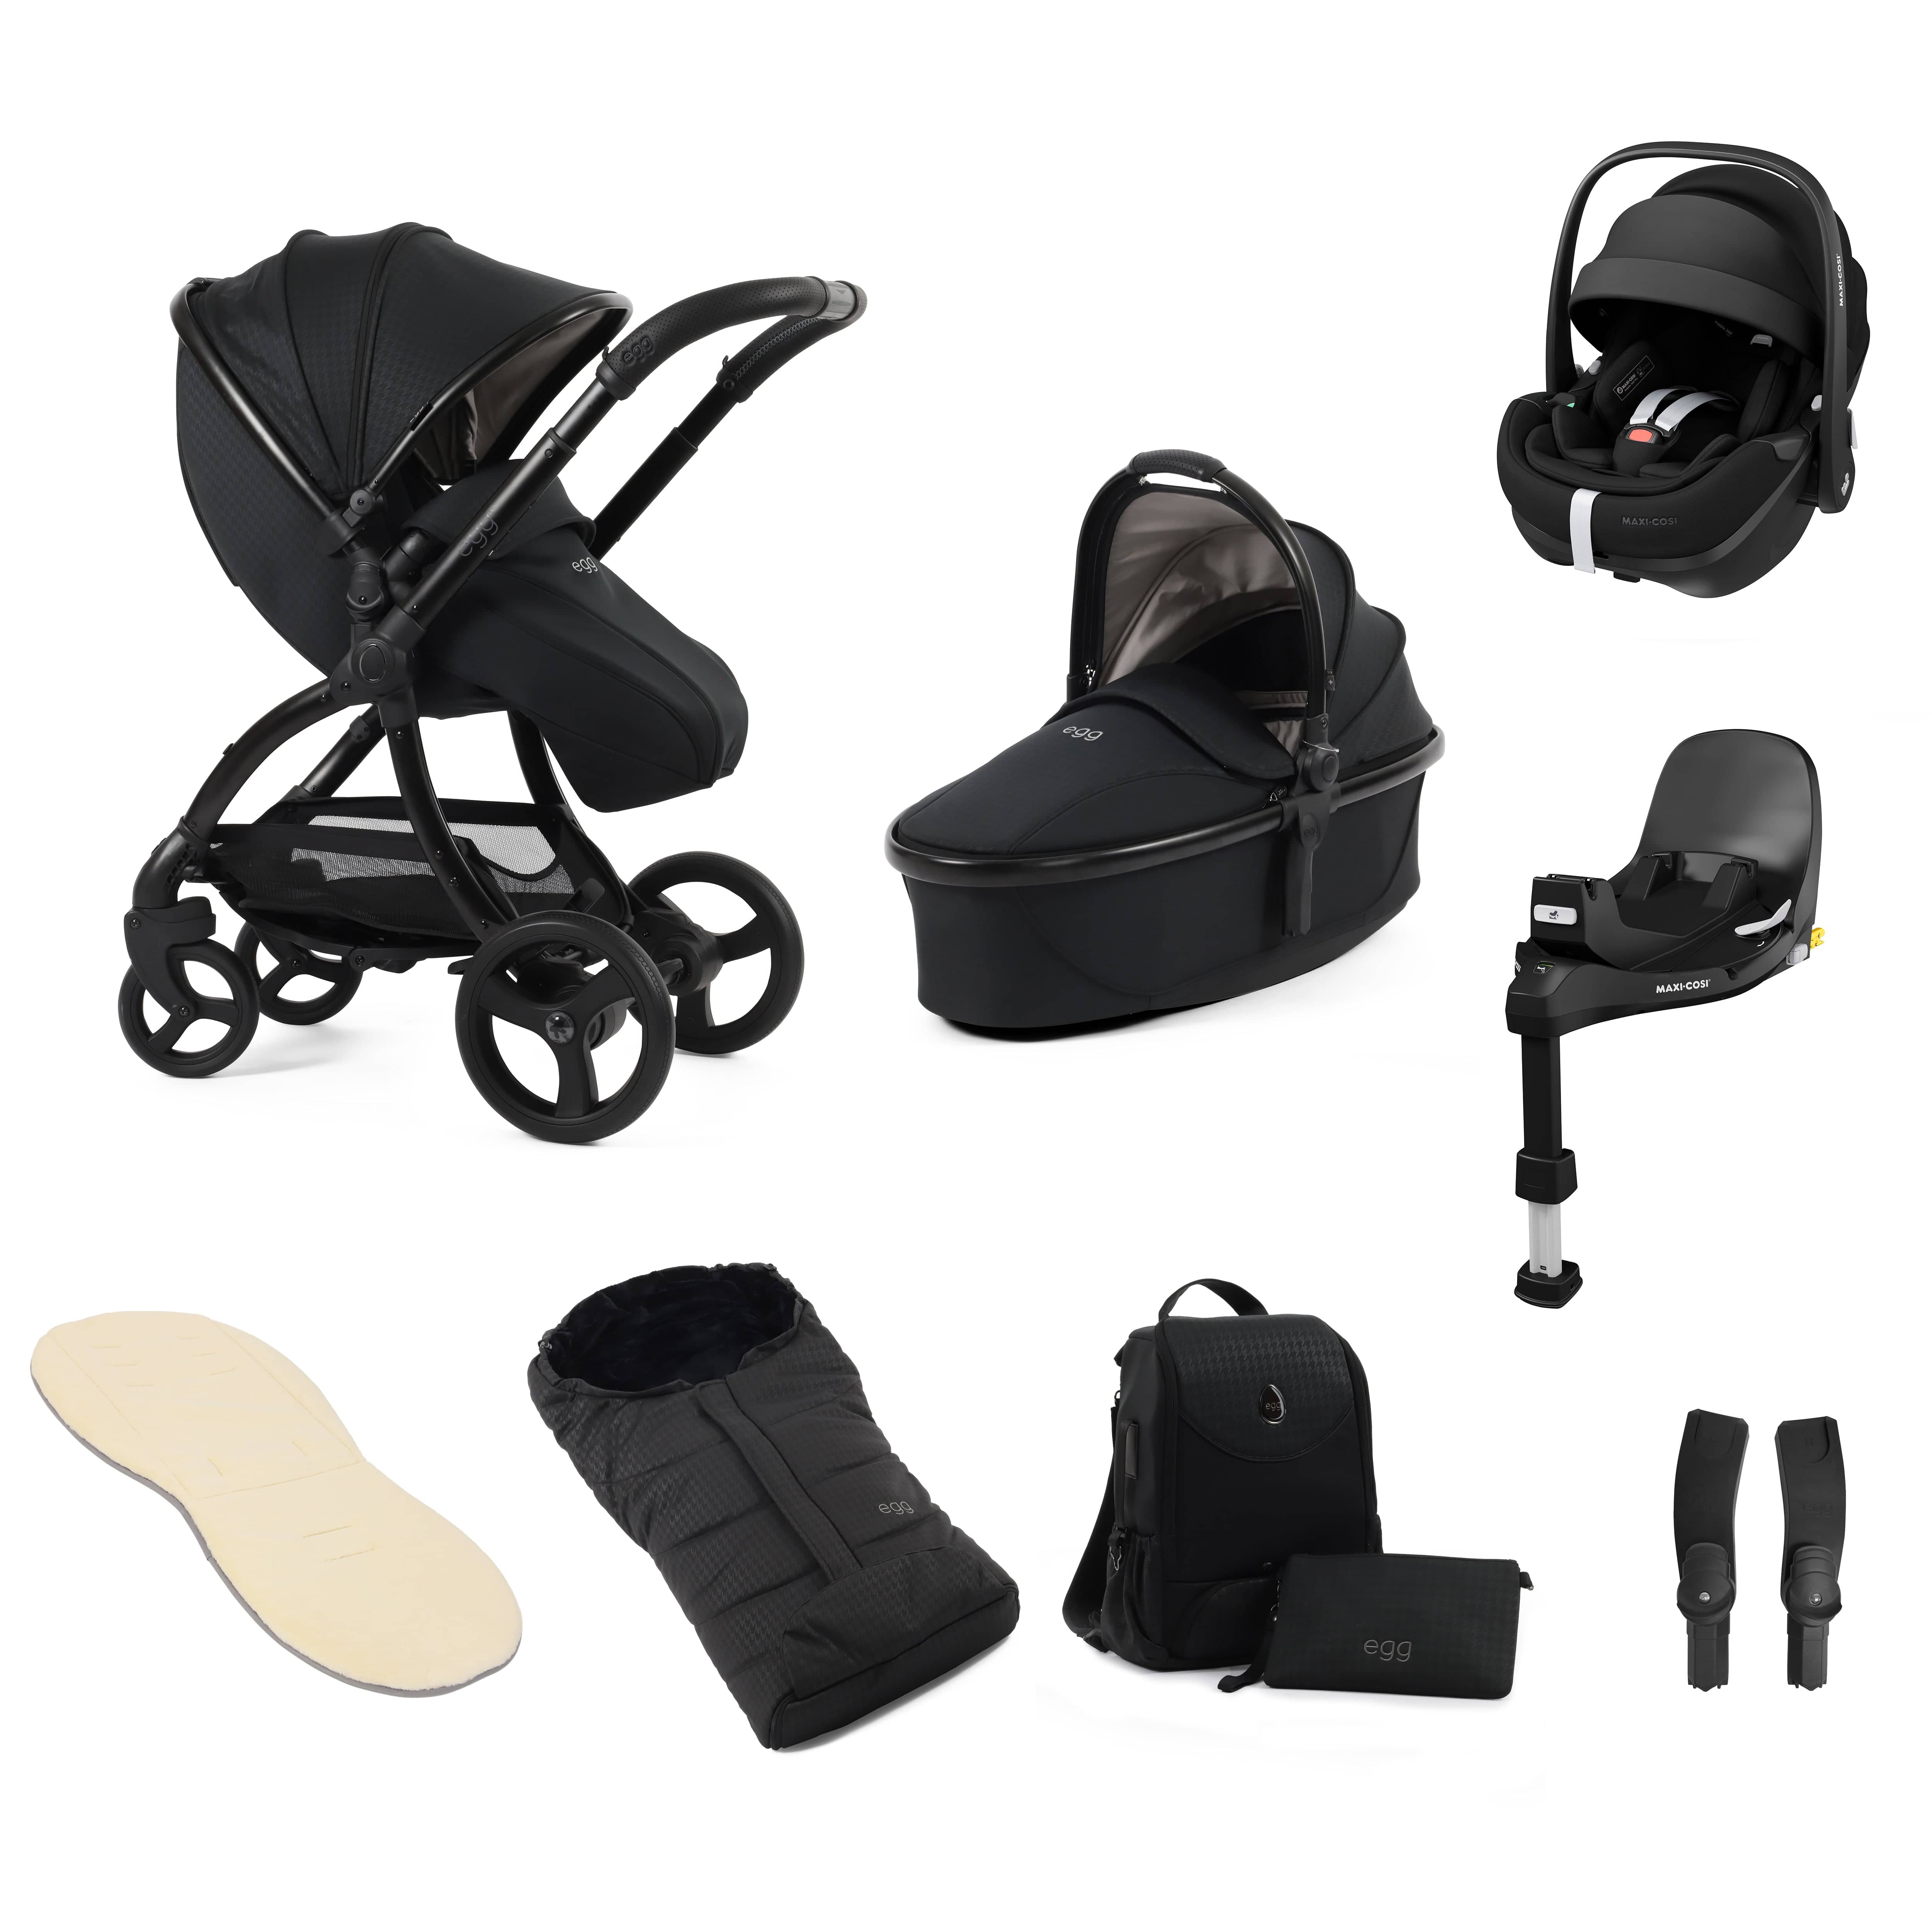 egg3 Luxury Travel System Bundle Special Edition Houndstooth Black Baby Prams 14865-HTB 5060711567853